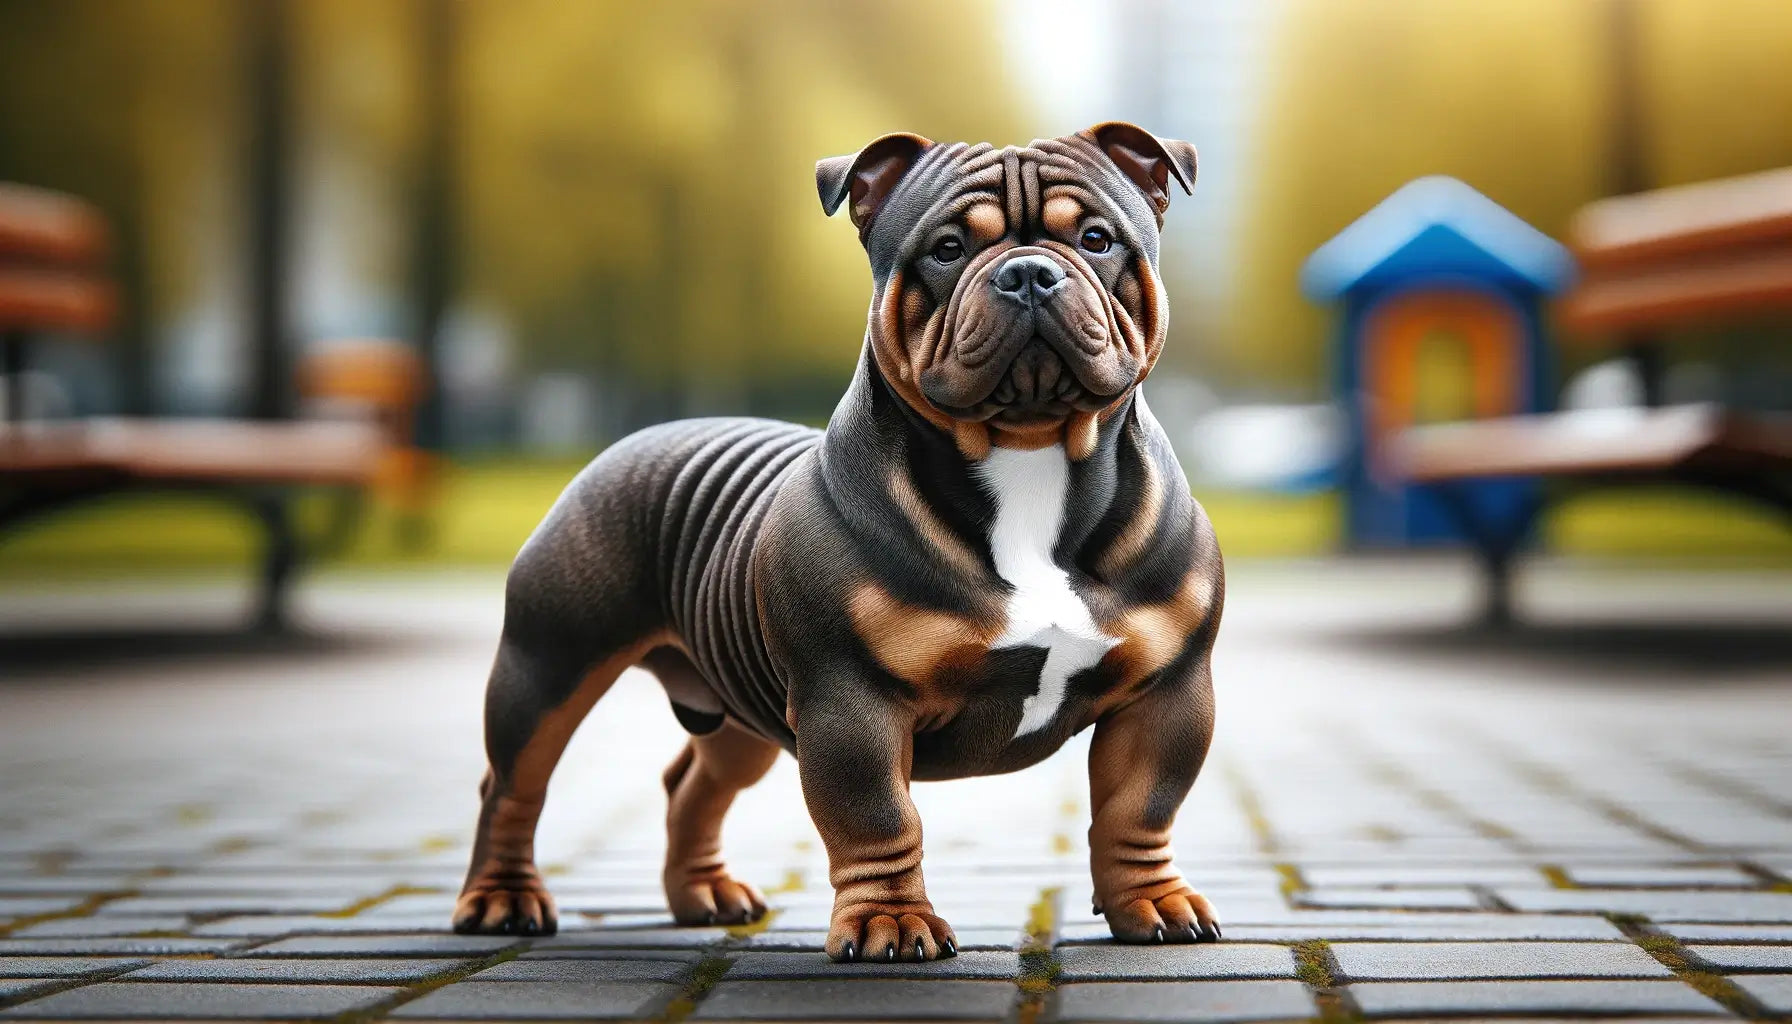 Micro Bully with a broad chest and well-defined musculature noticeably lower to the ground compared to other Bully breeds